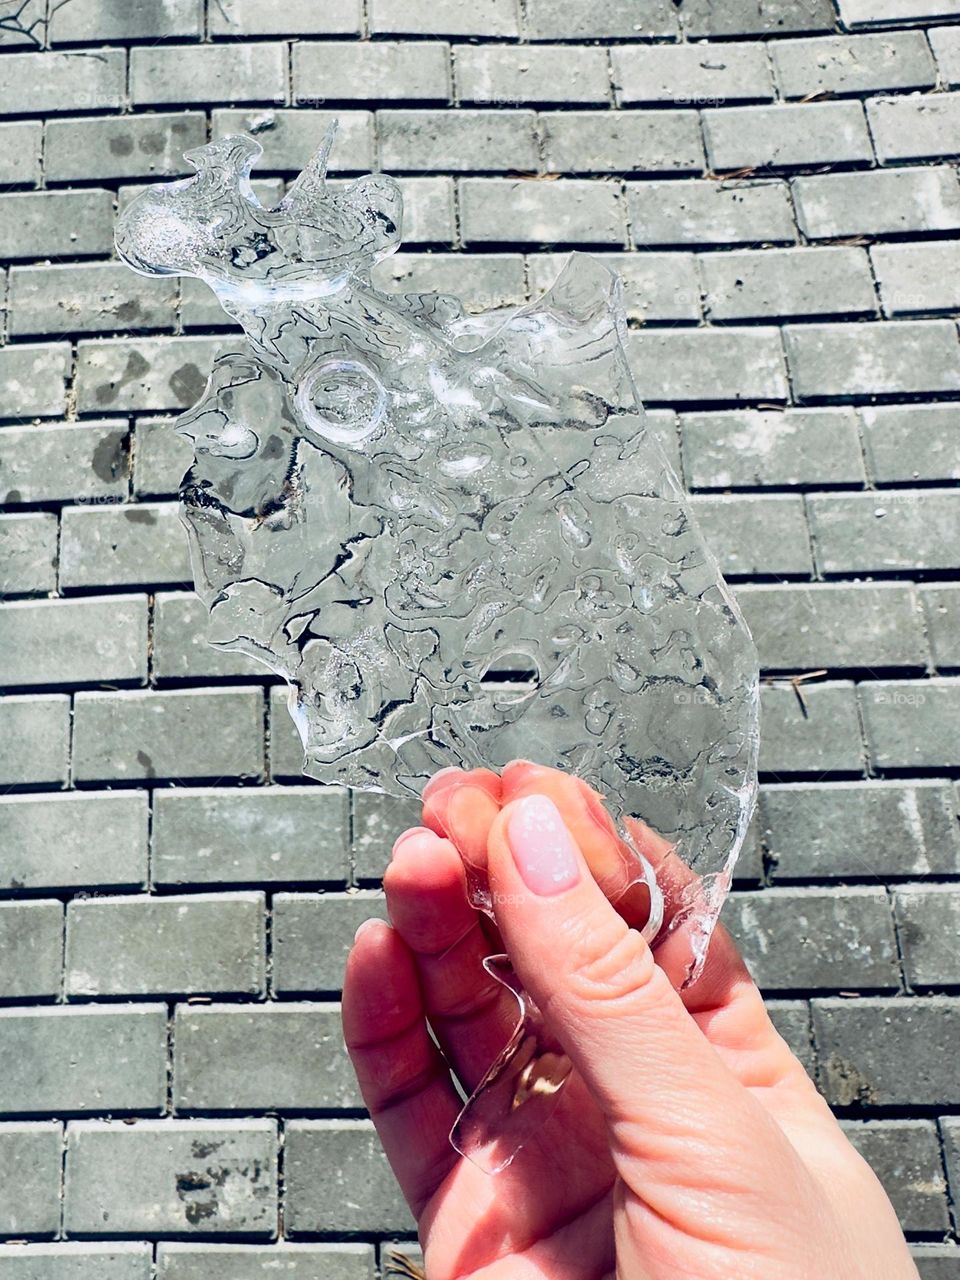 A piece of ice in a woman’s hand